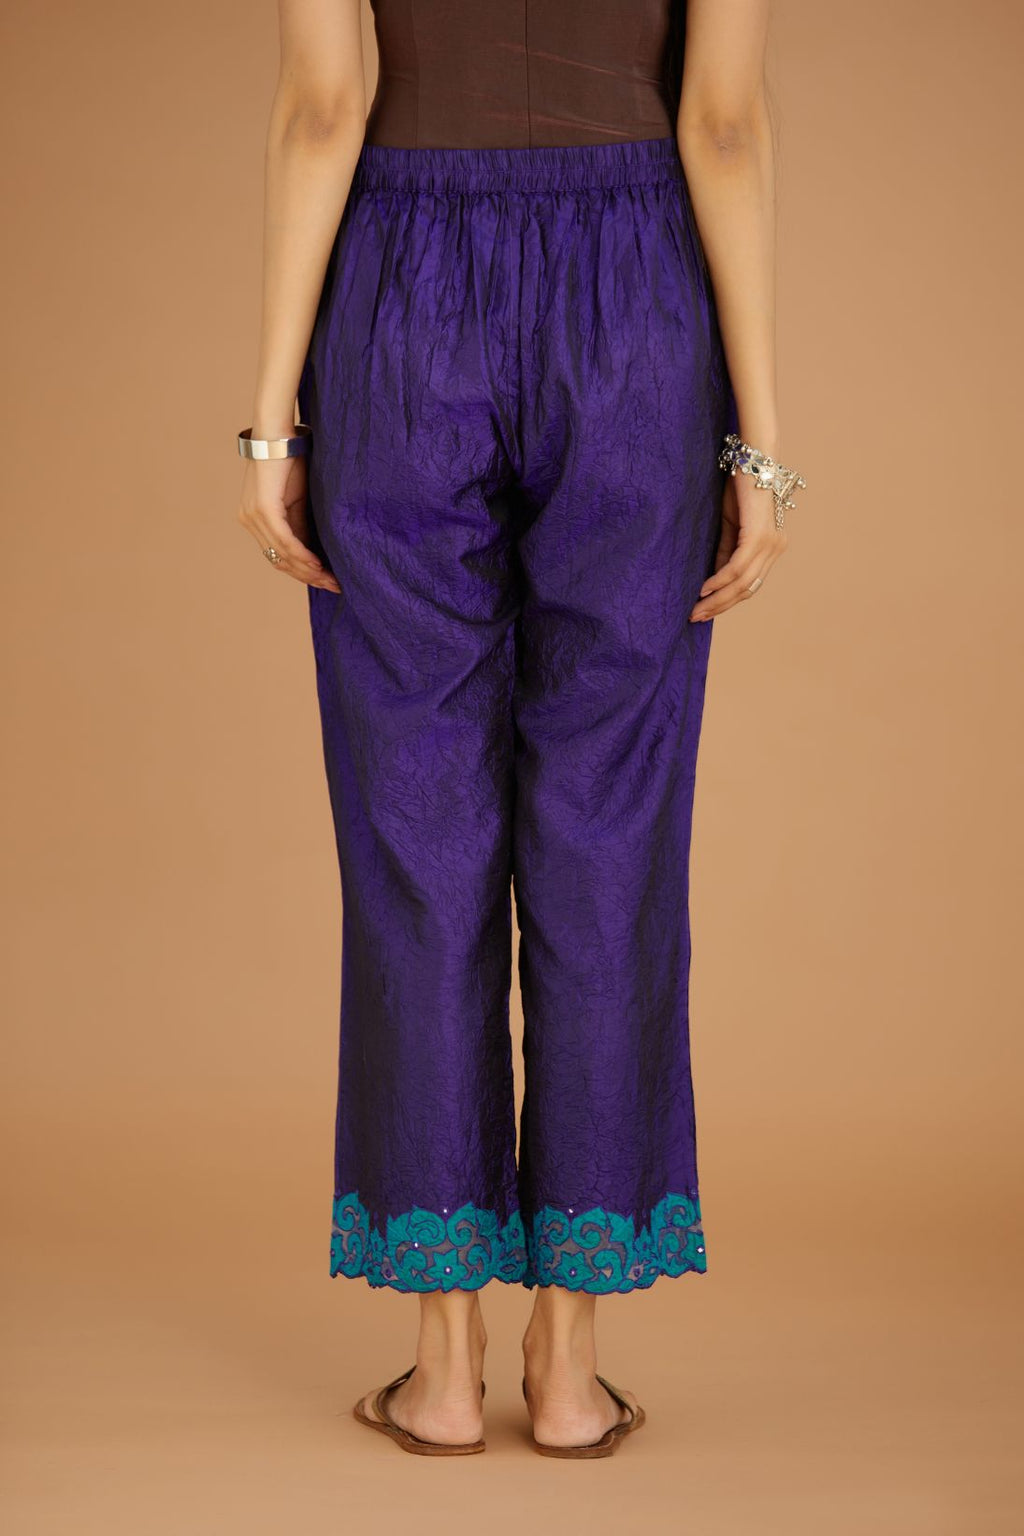 Blue hand crushed silk pants with contrast silk and organza fabric cutwork embroidery at bottom hem, highlighted with hand attached mirrors.